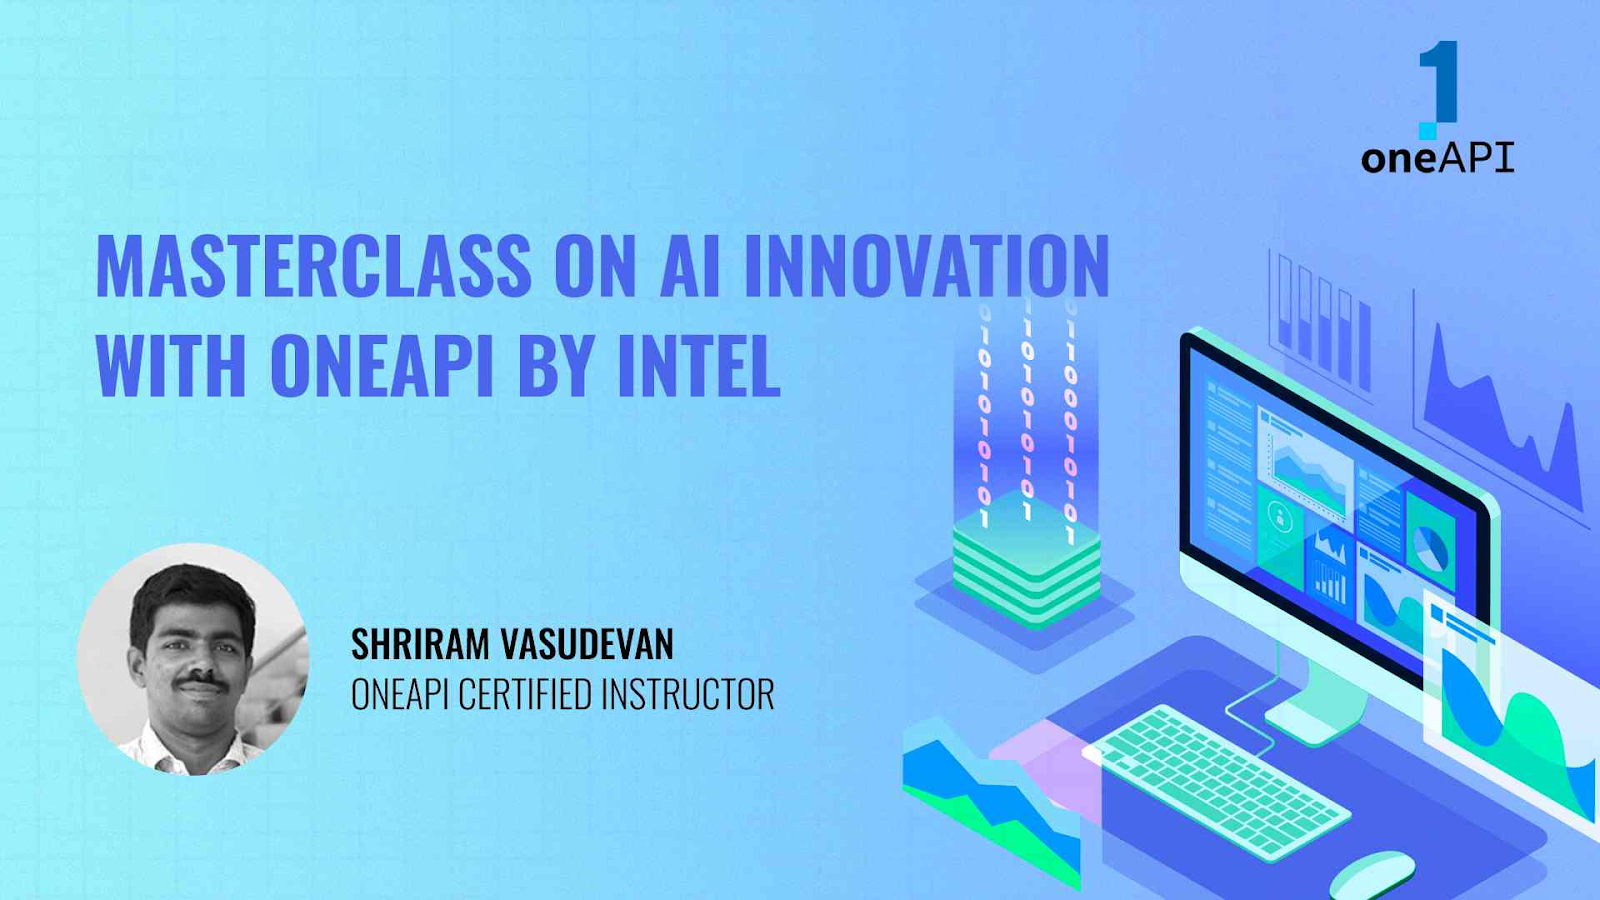 AI innovation with oneAPI: Key takeaways from this masterclass by Intel